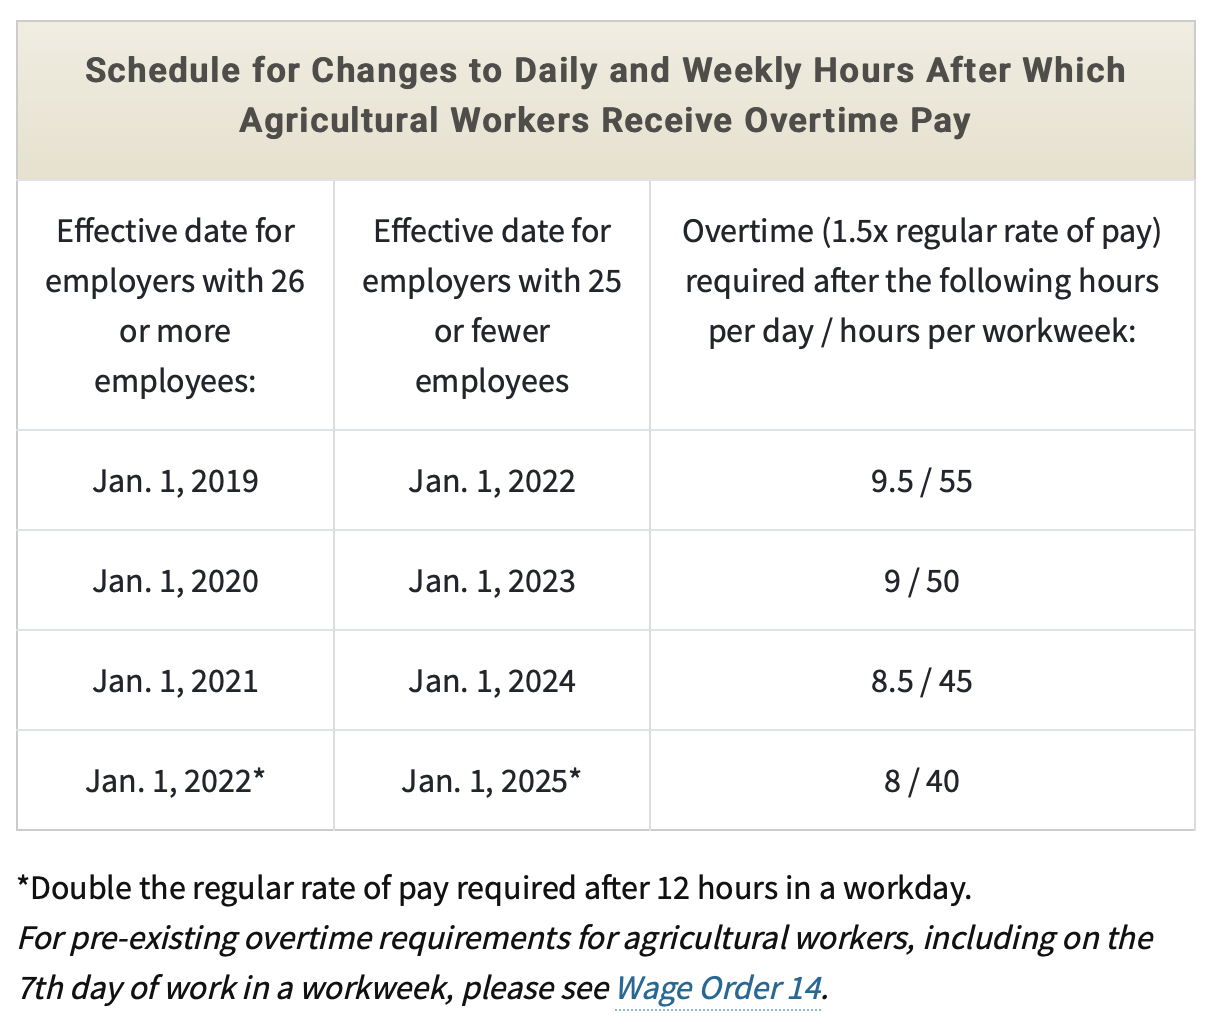 Overtime for California farmworkers is phased-in over a four-year period, between 2019 and 2022